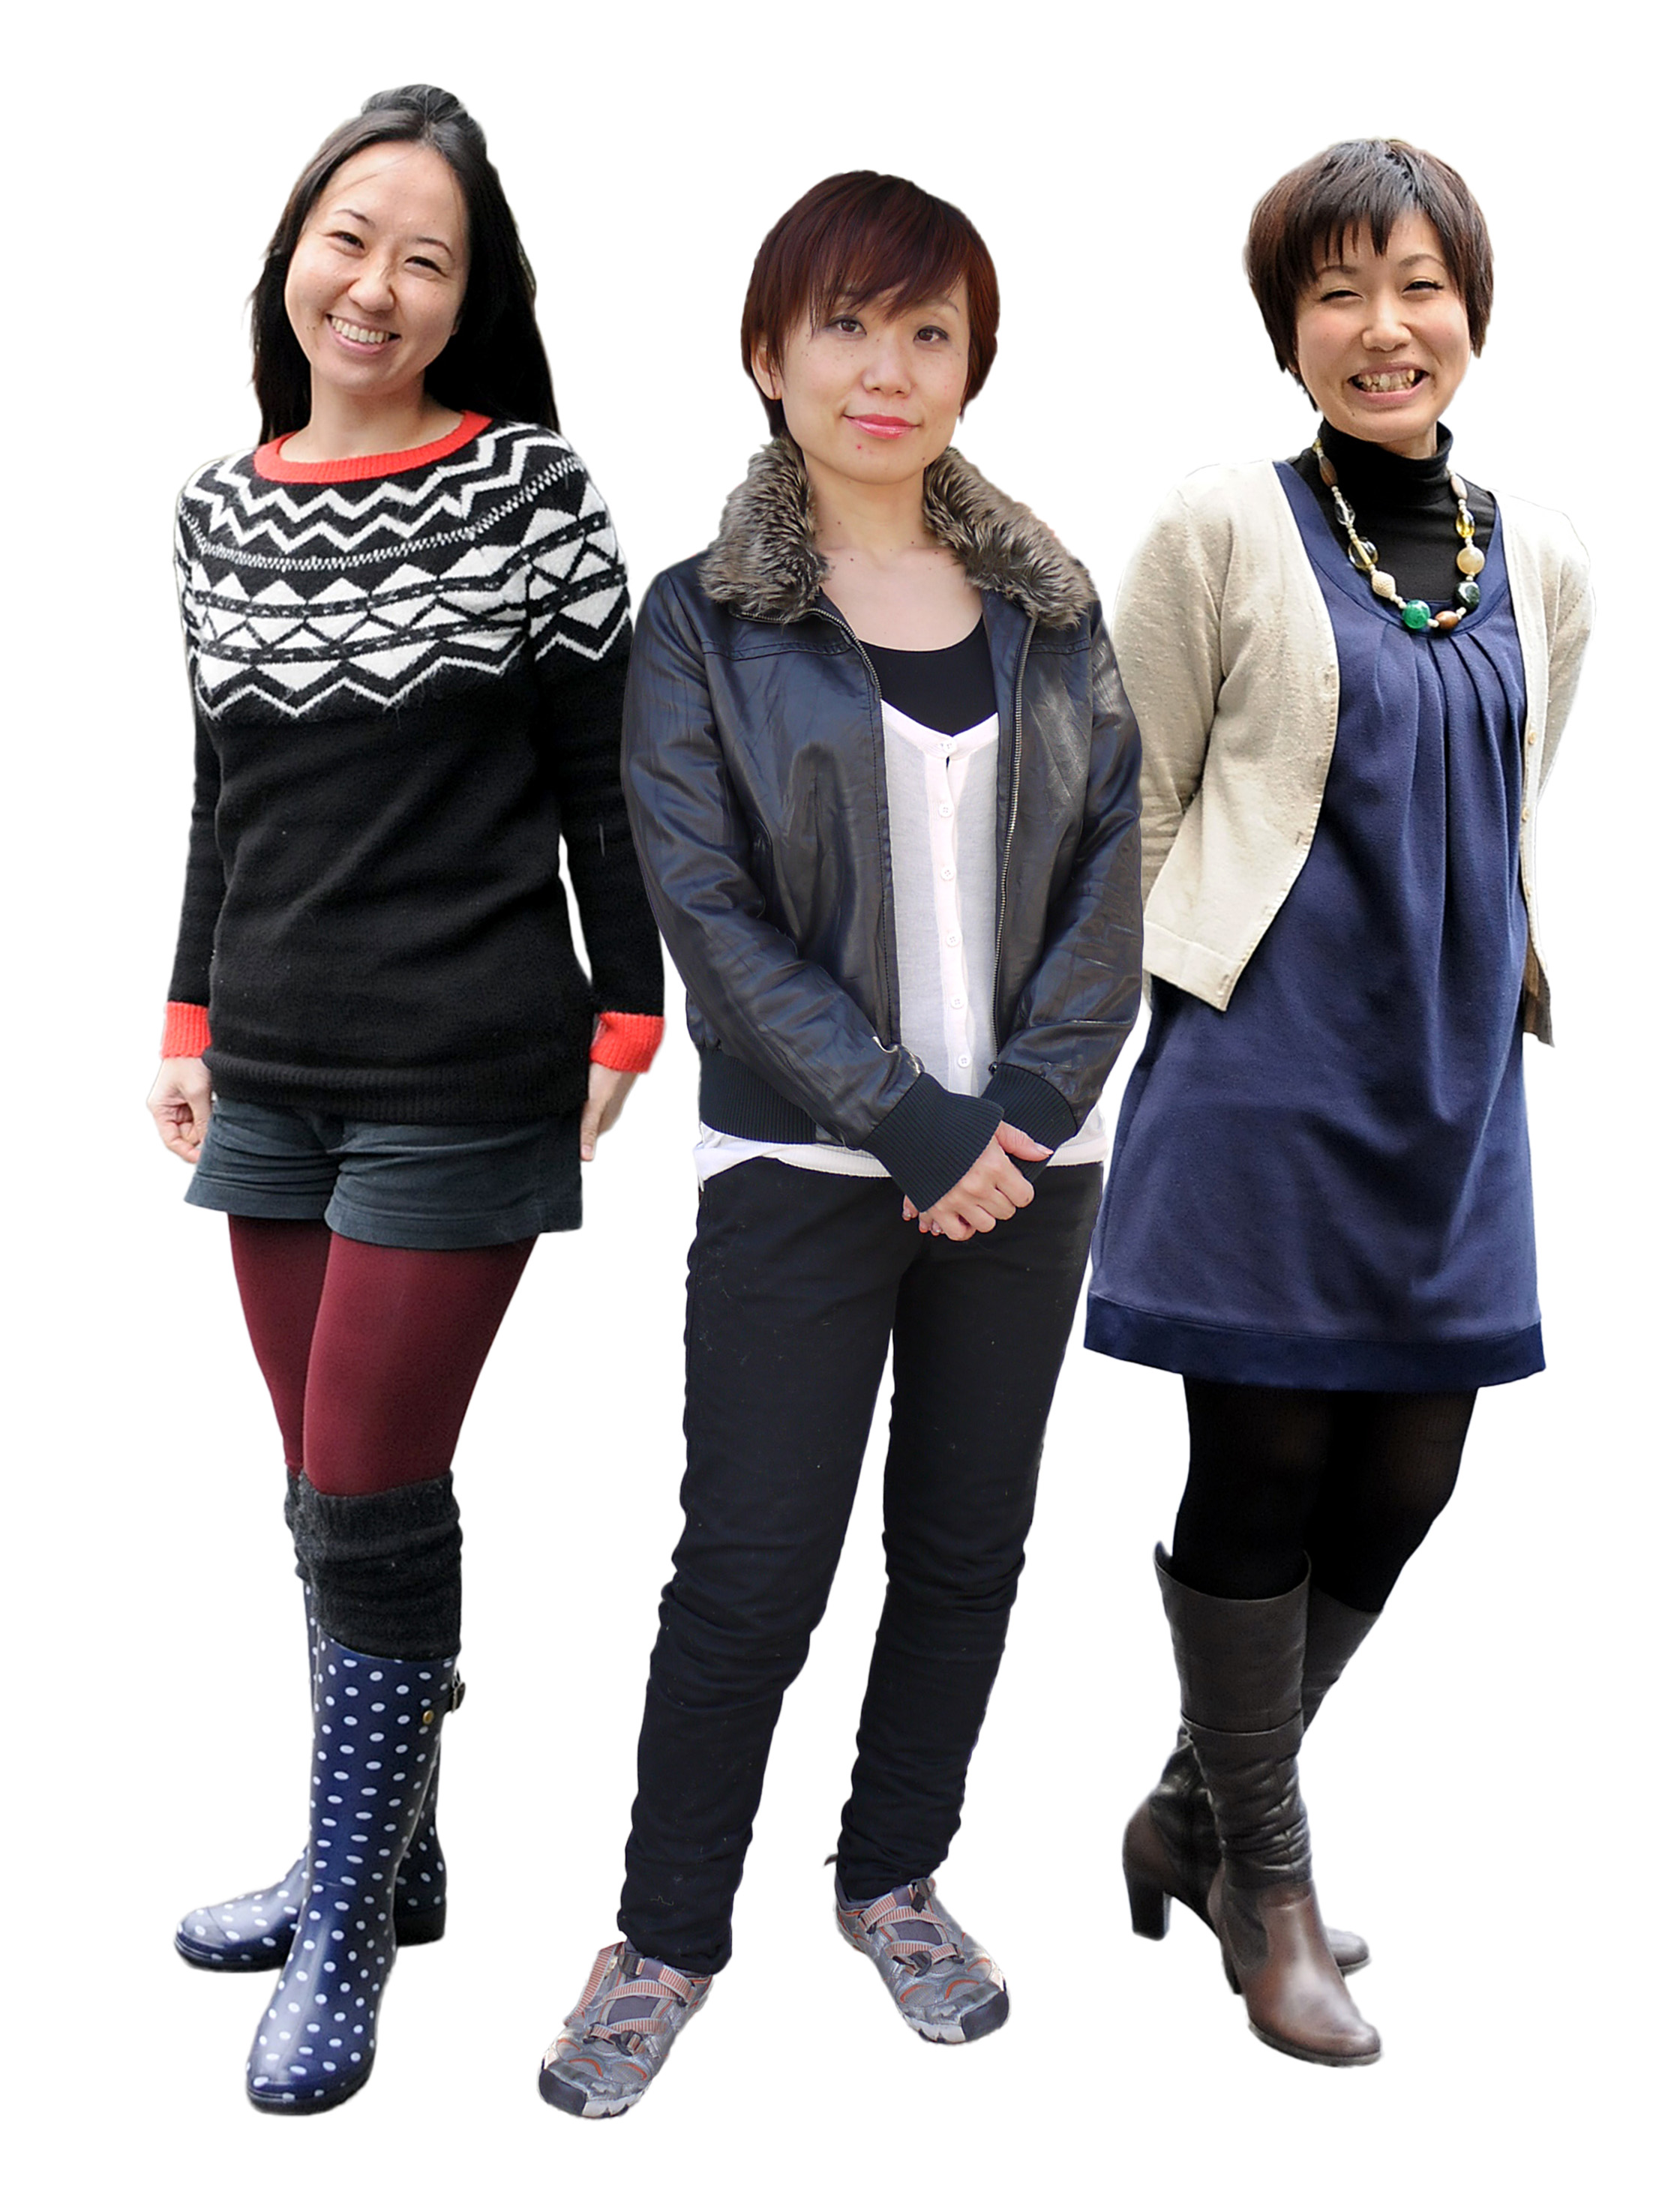 PicasaJapanese women strive to empower